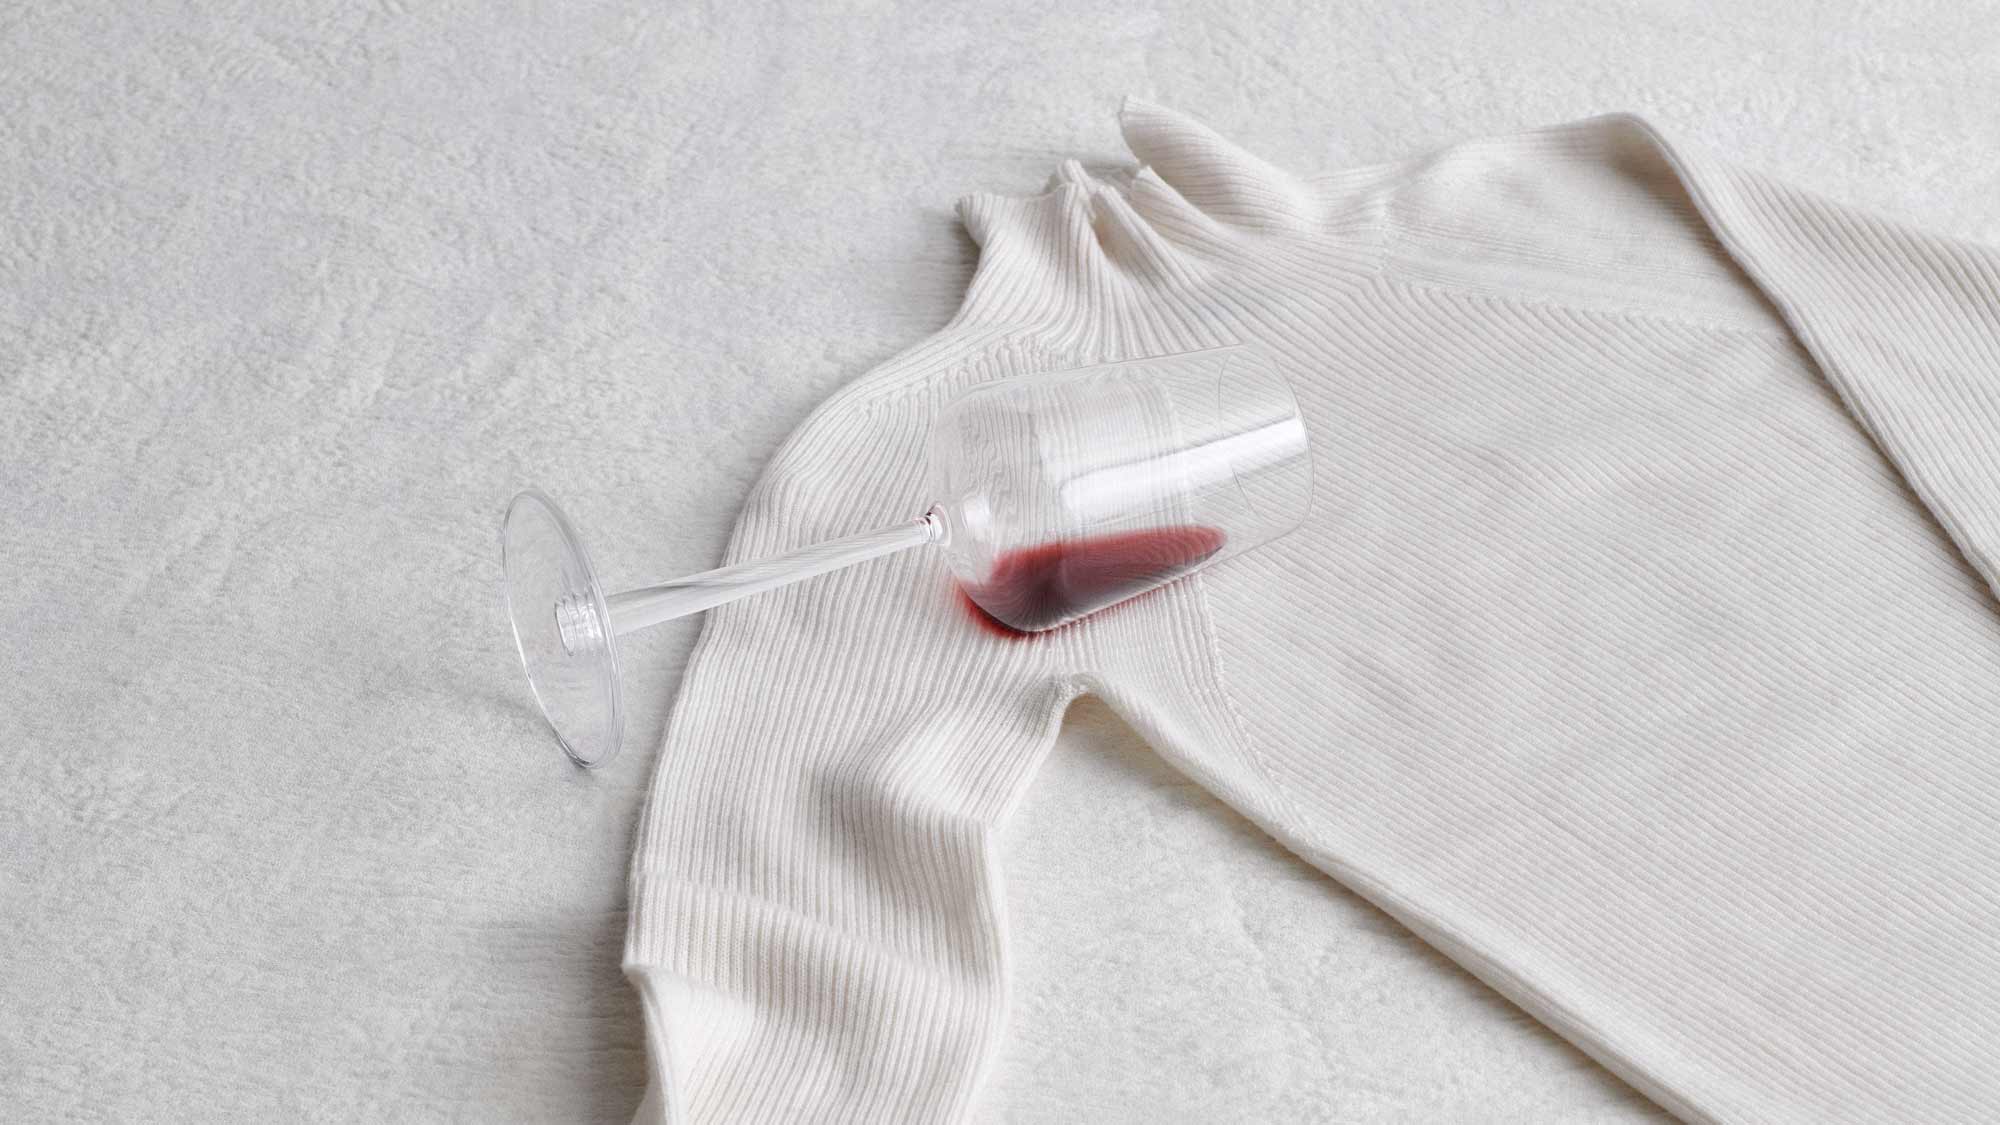 Glass of red wine lying on a cream jumper